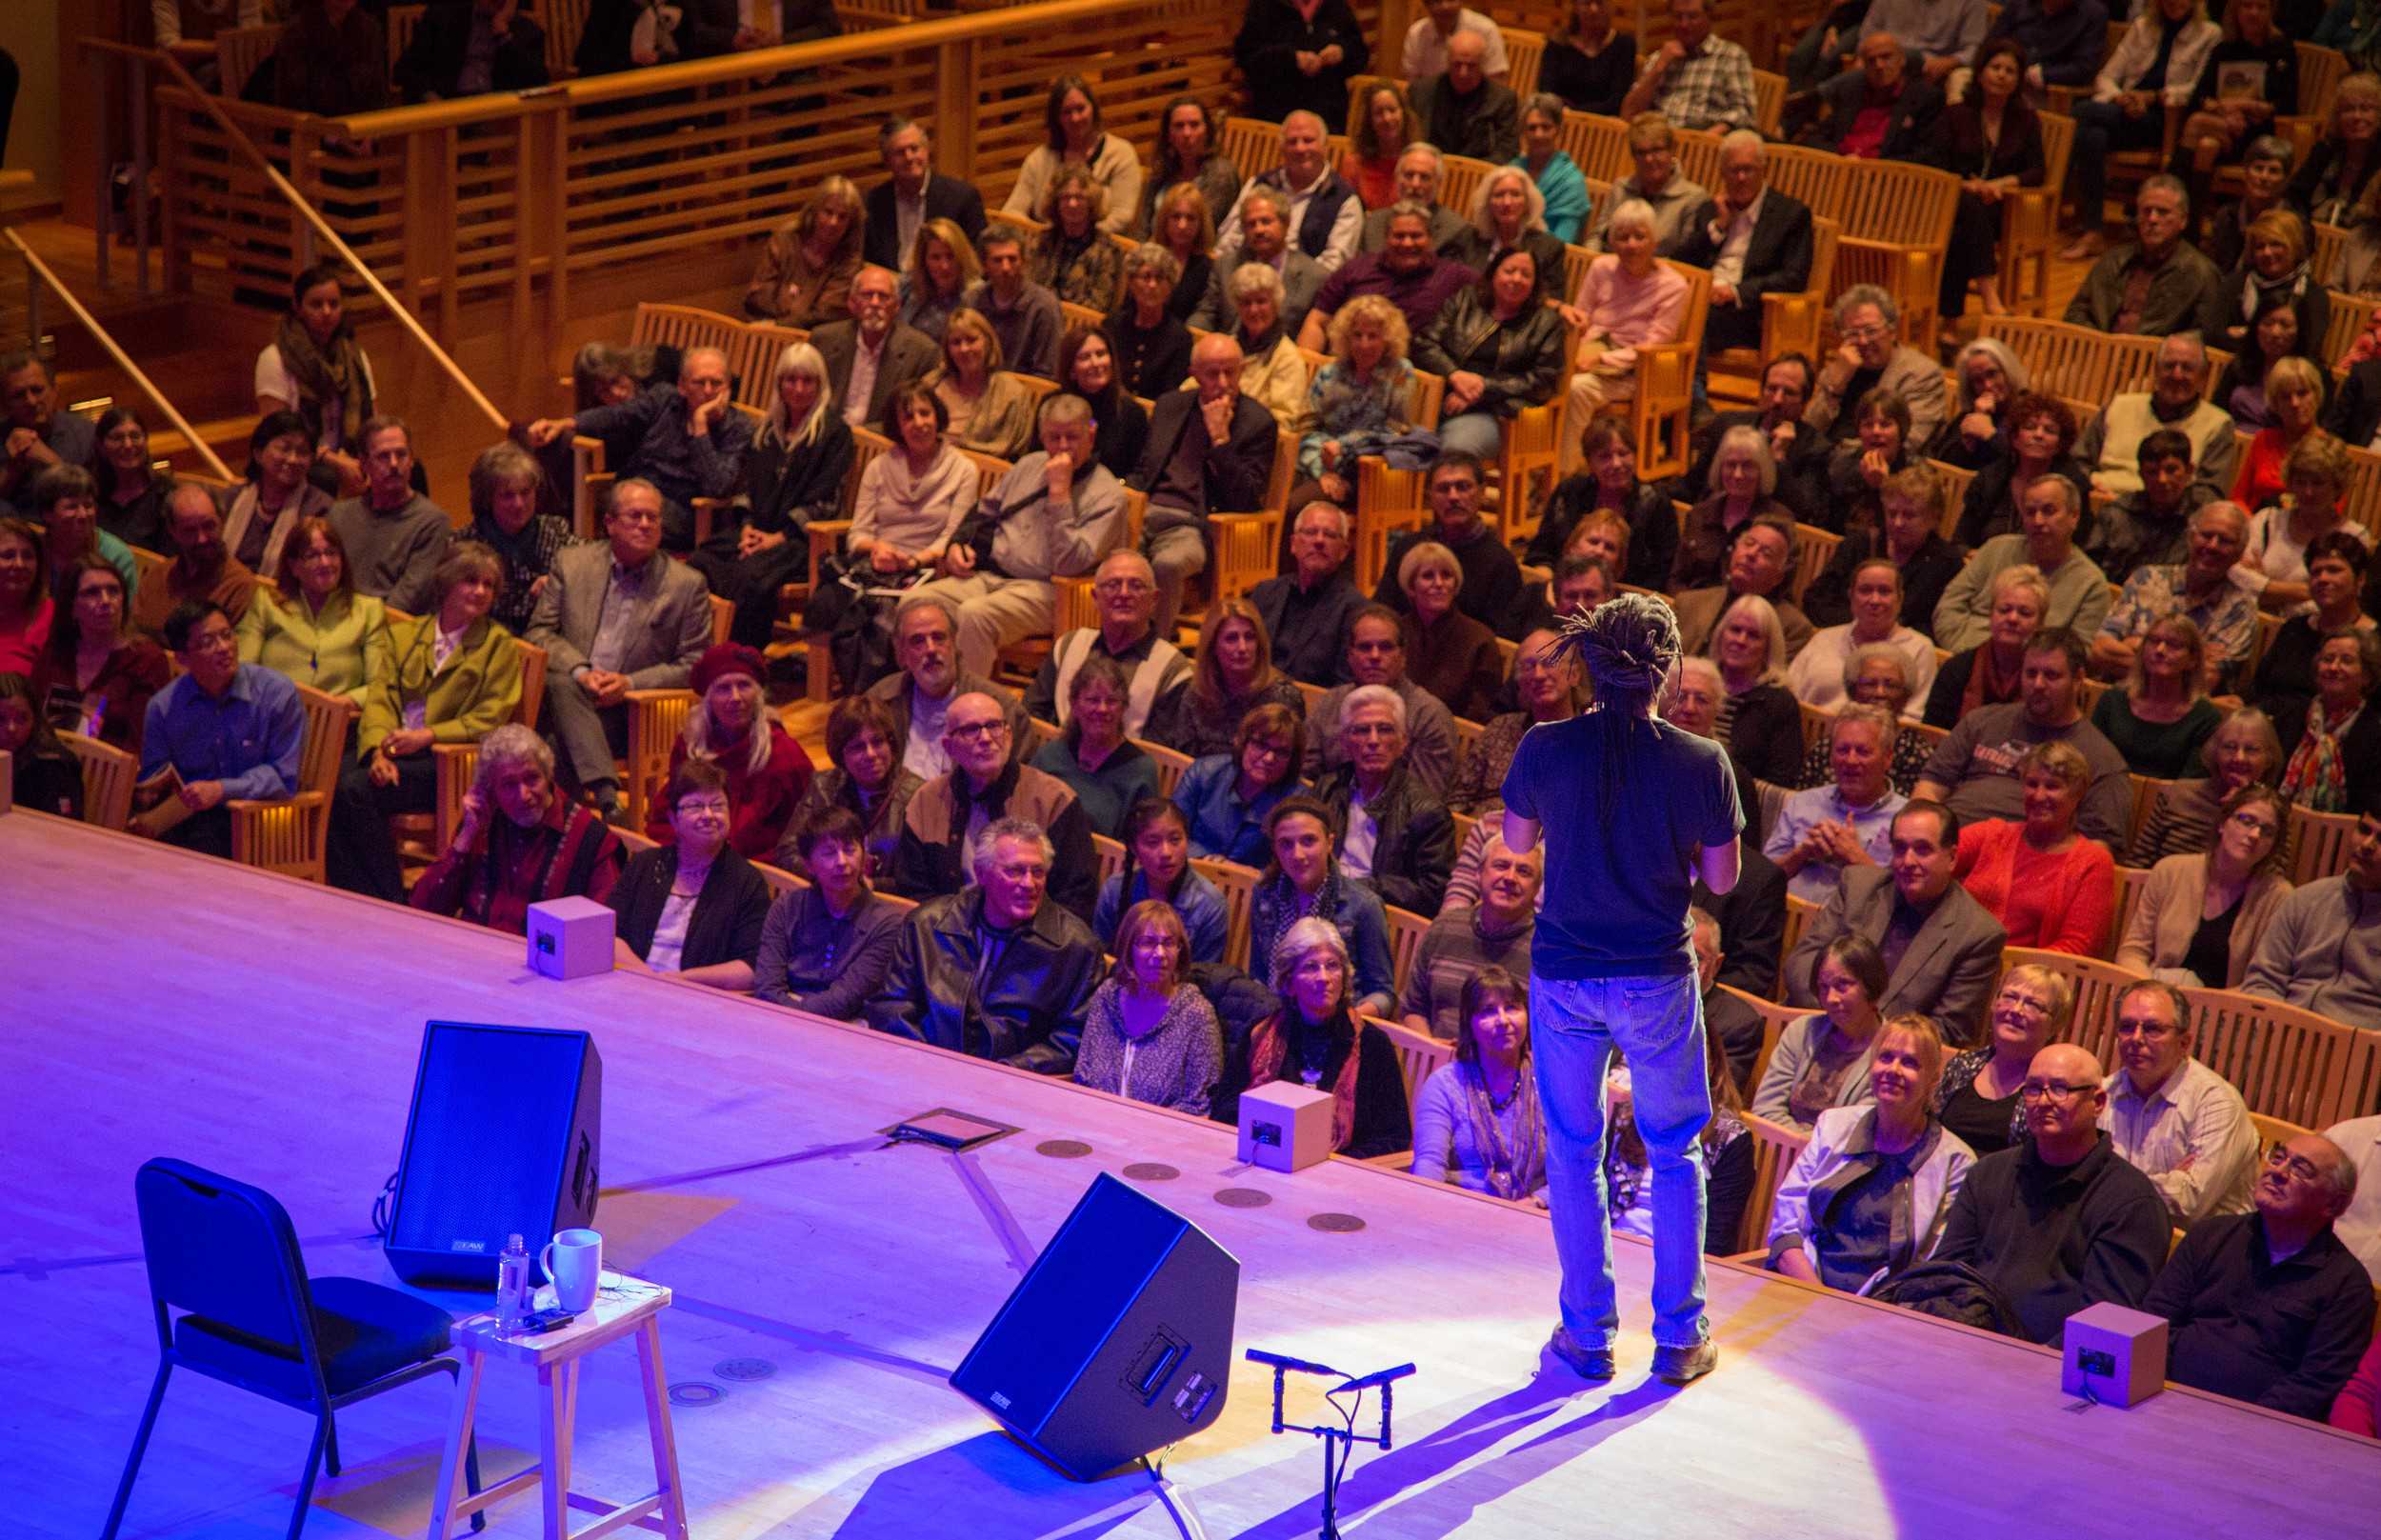 COURTESY // Nikki AndersonA sold-out crowd at the Green Music Center sang along with Bobby McFerrin for numerous songs. McFerrin performed a verse from his classic hit, “Don’t Worry, Be Happy,” a song that he hasn’t performed since 1988.